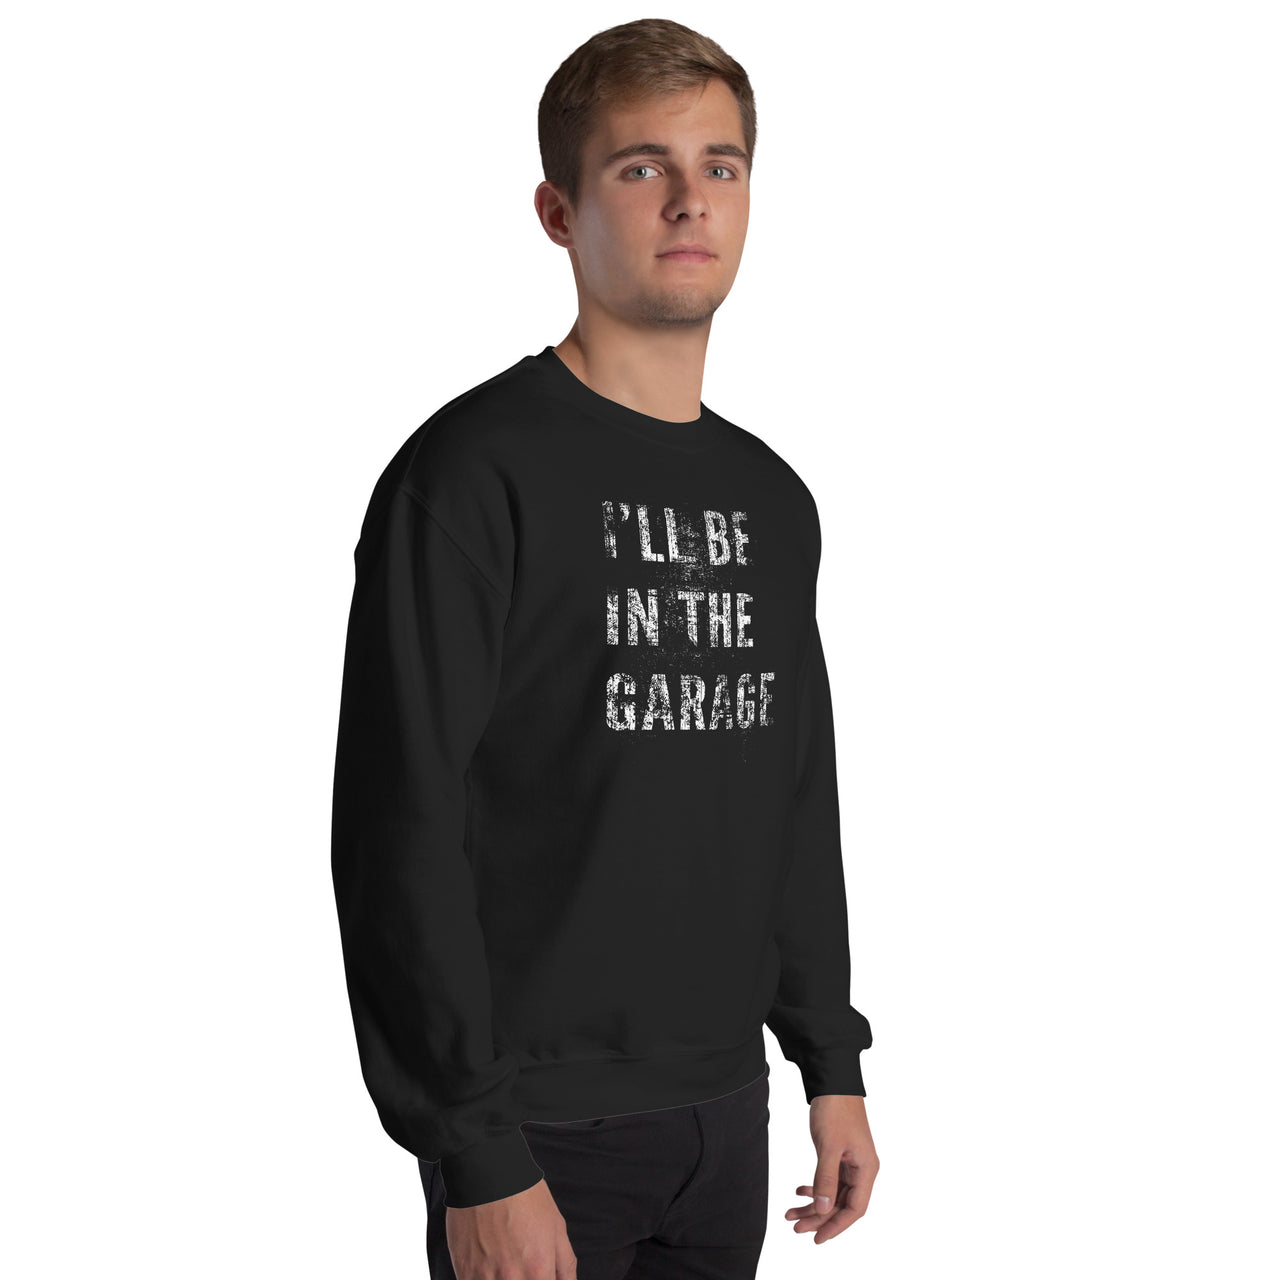 I'll Be In The Garage, Mechanic Sweatshirt , Car Enthusiast Crew Neck Pullover modeled in black